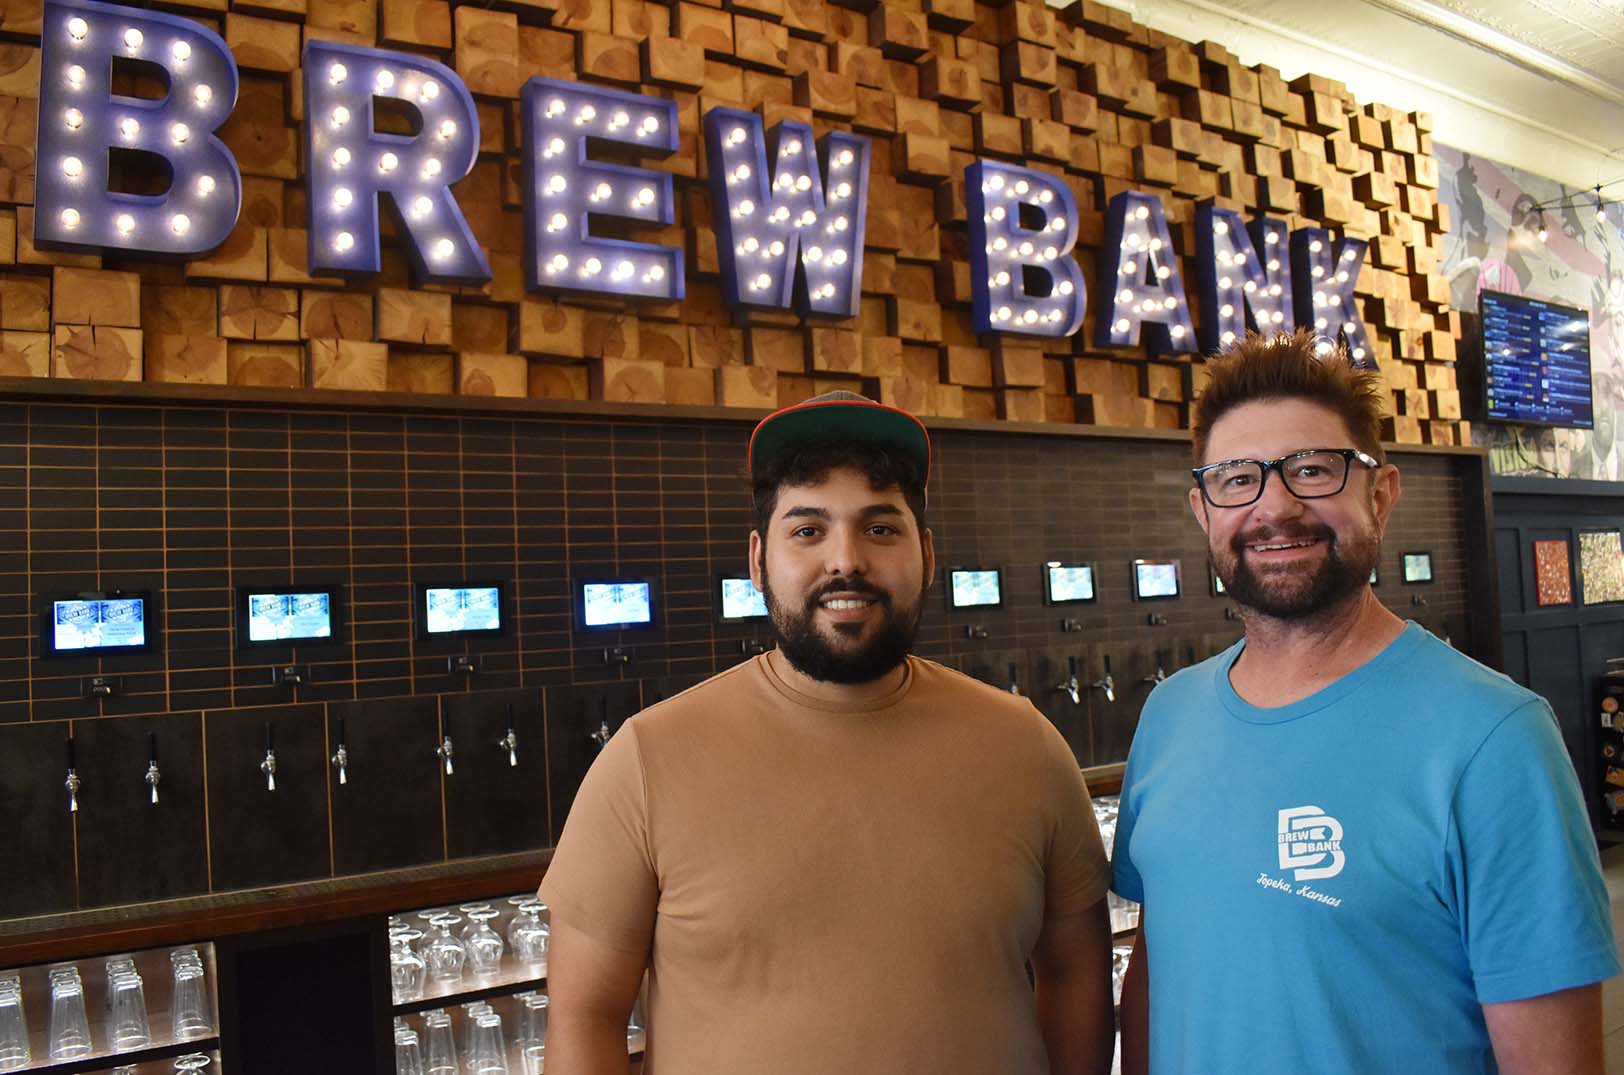 Brew Bank raises the bar for craft beer, cocktails from this history-making Kansas taproom